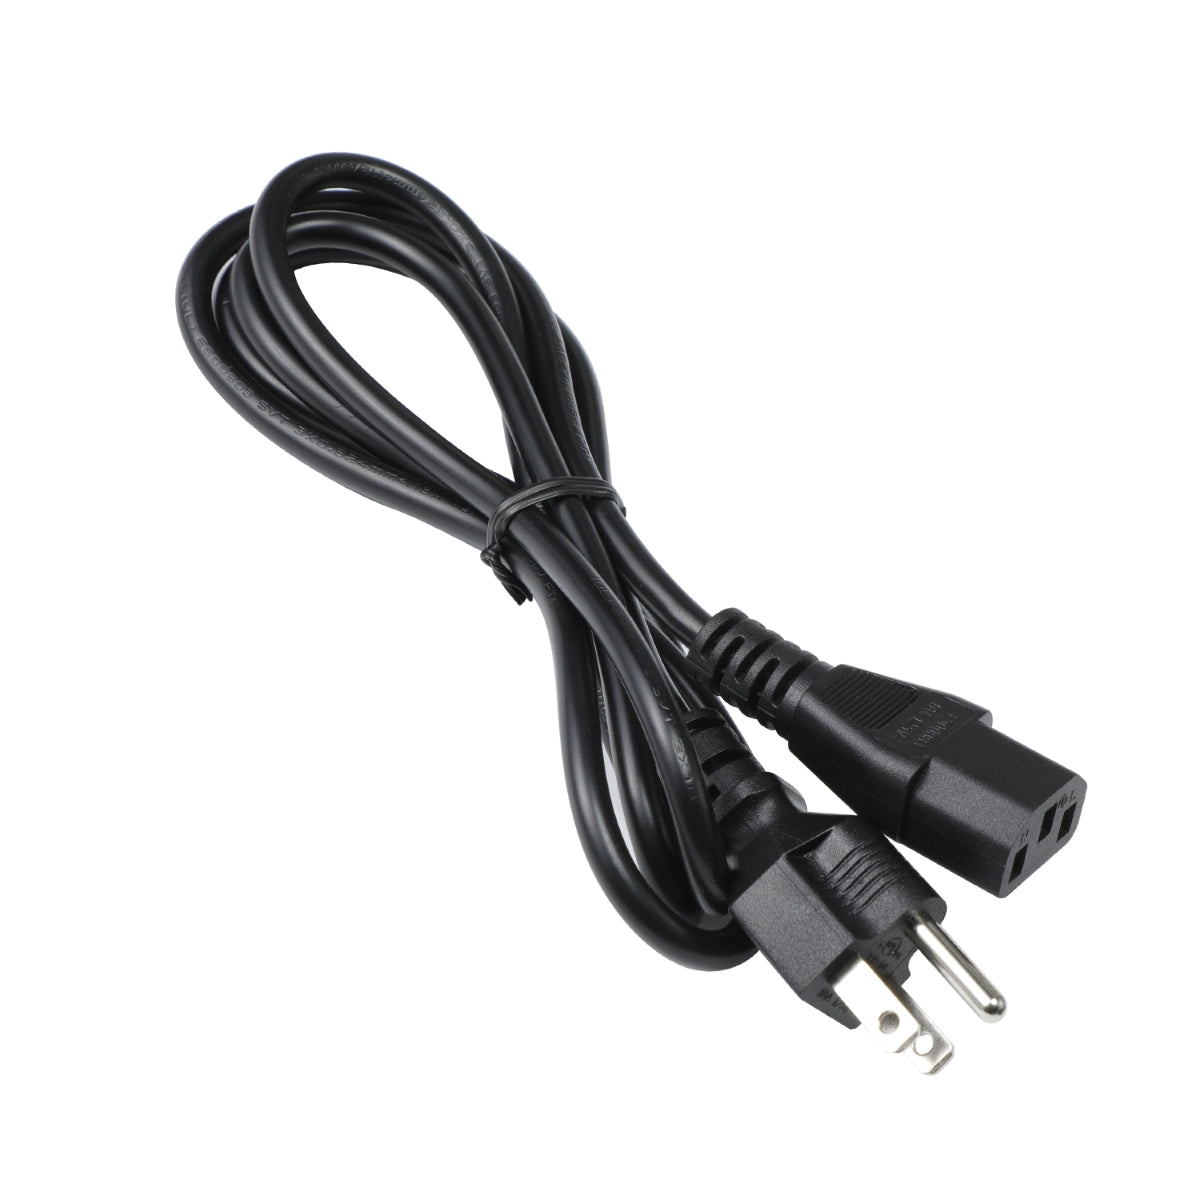 Power Cable for Philips 241B8QTAA Monitor.